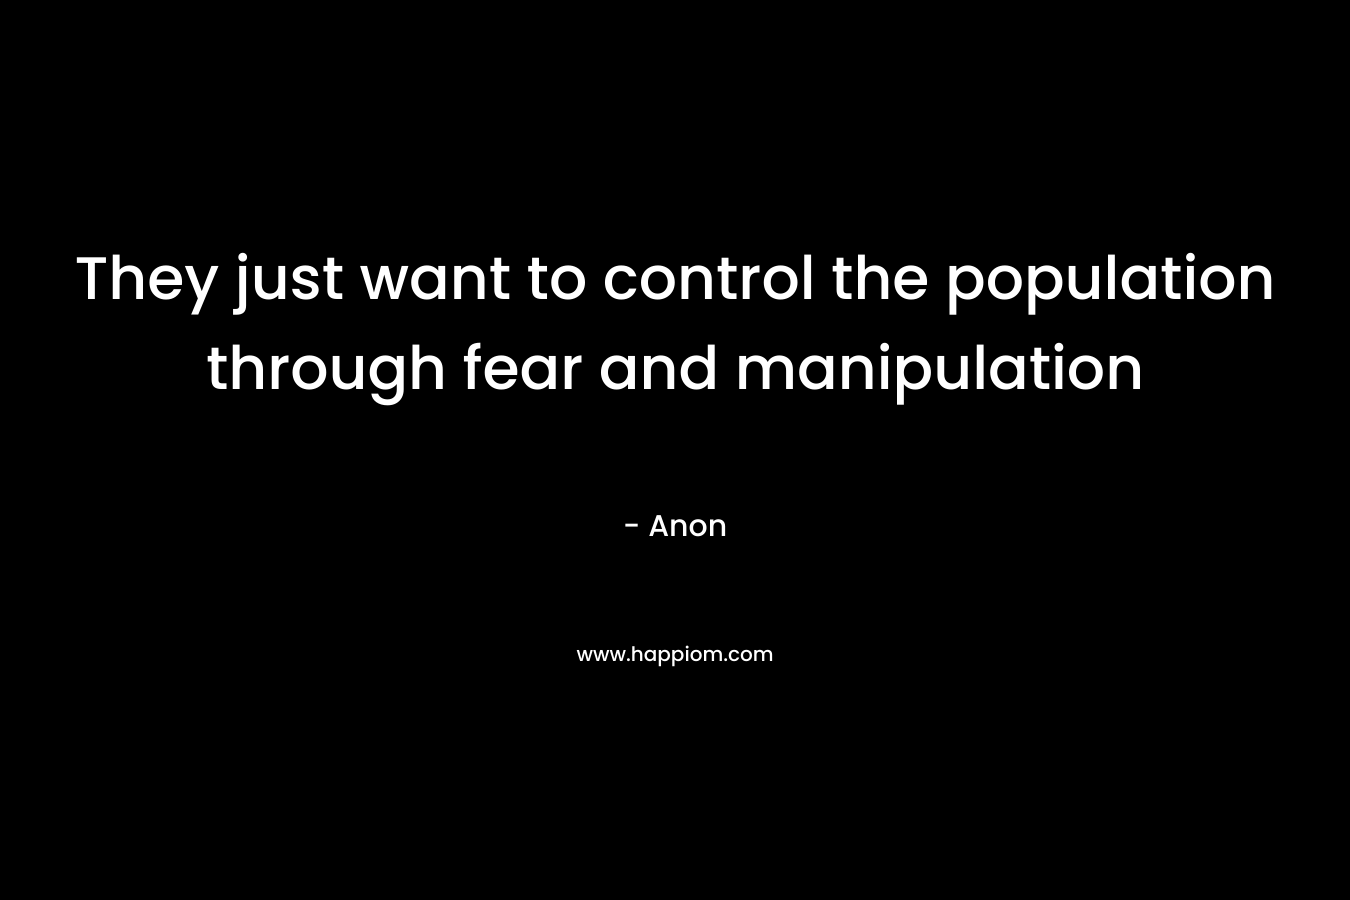 They just want to control the population through fear and manipulation